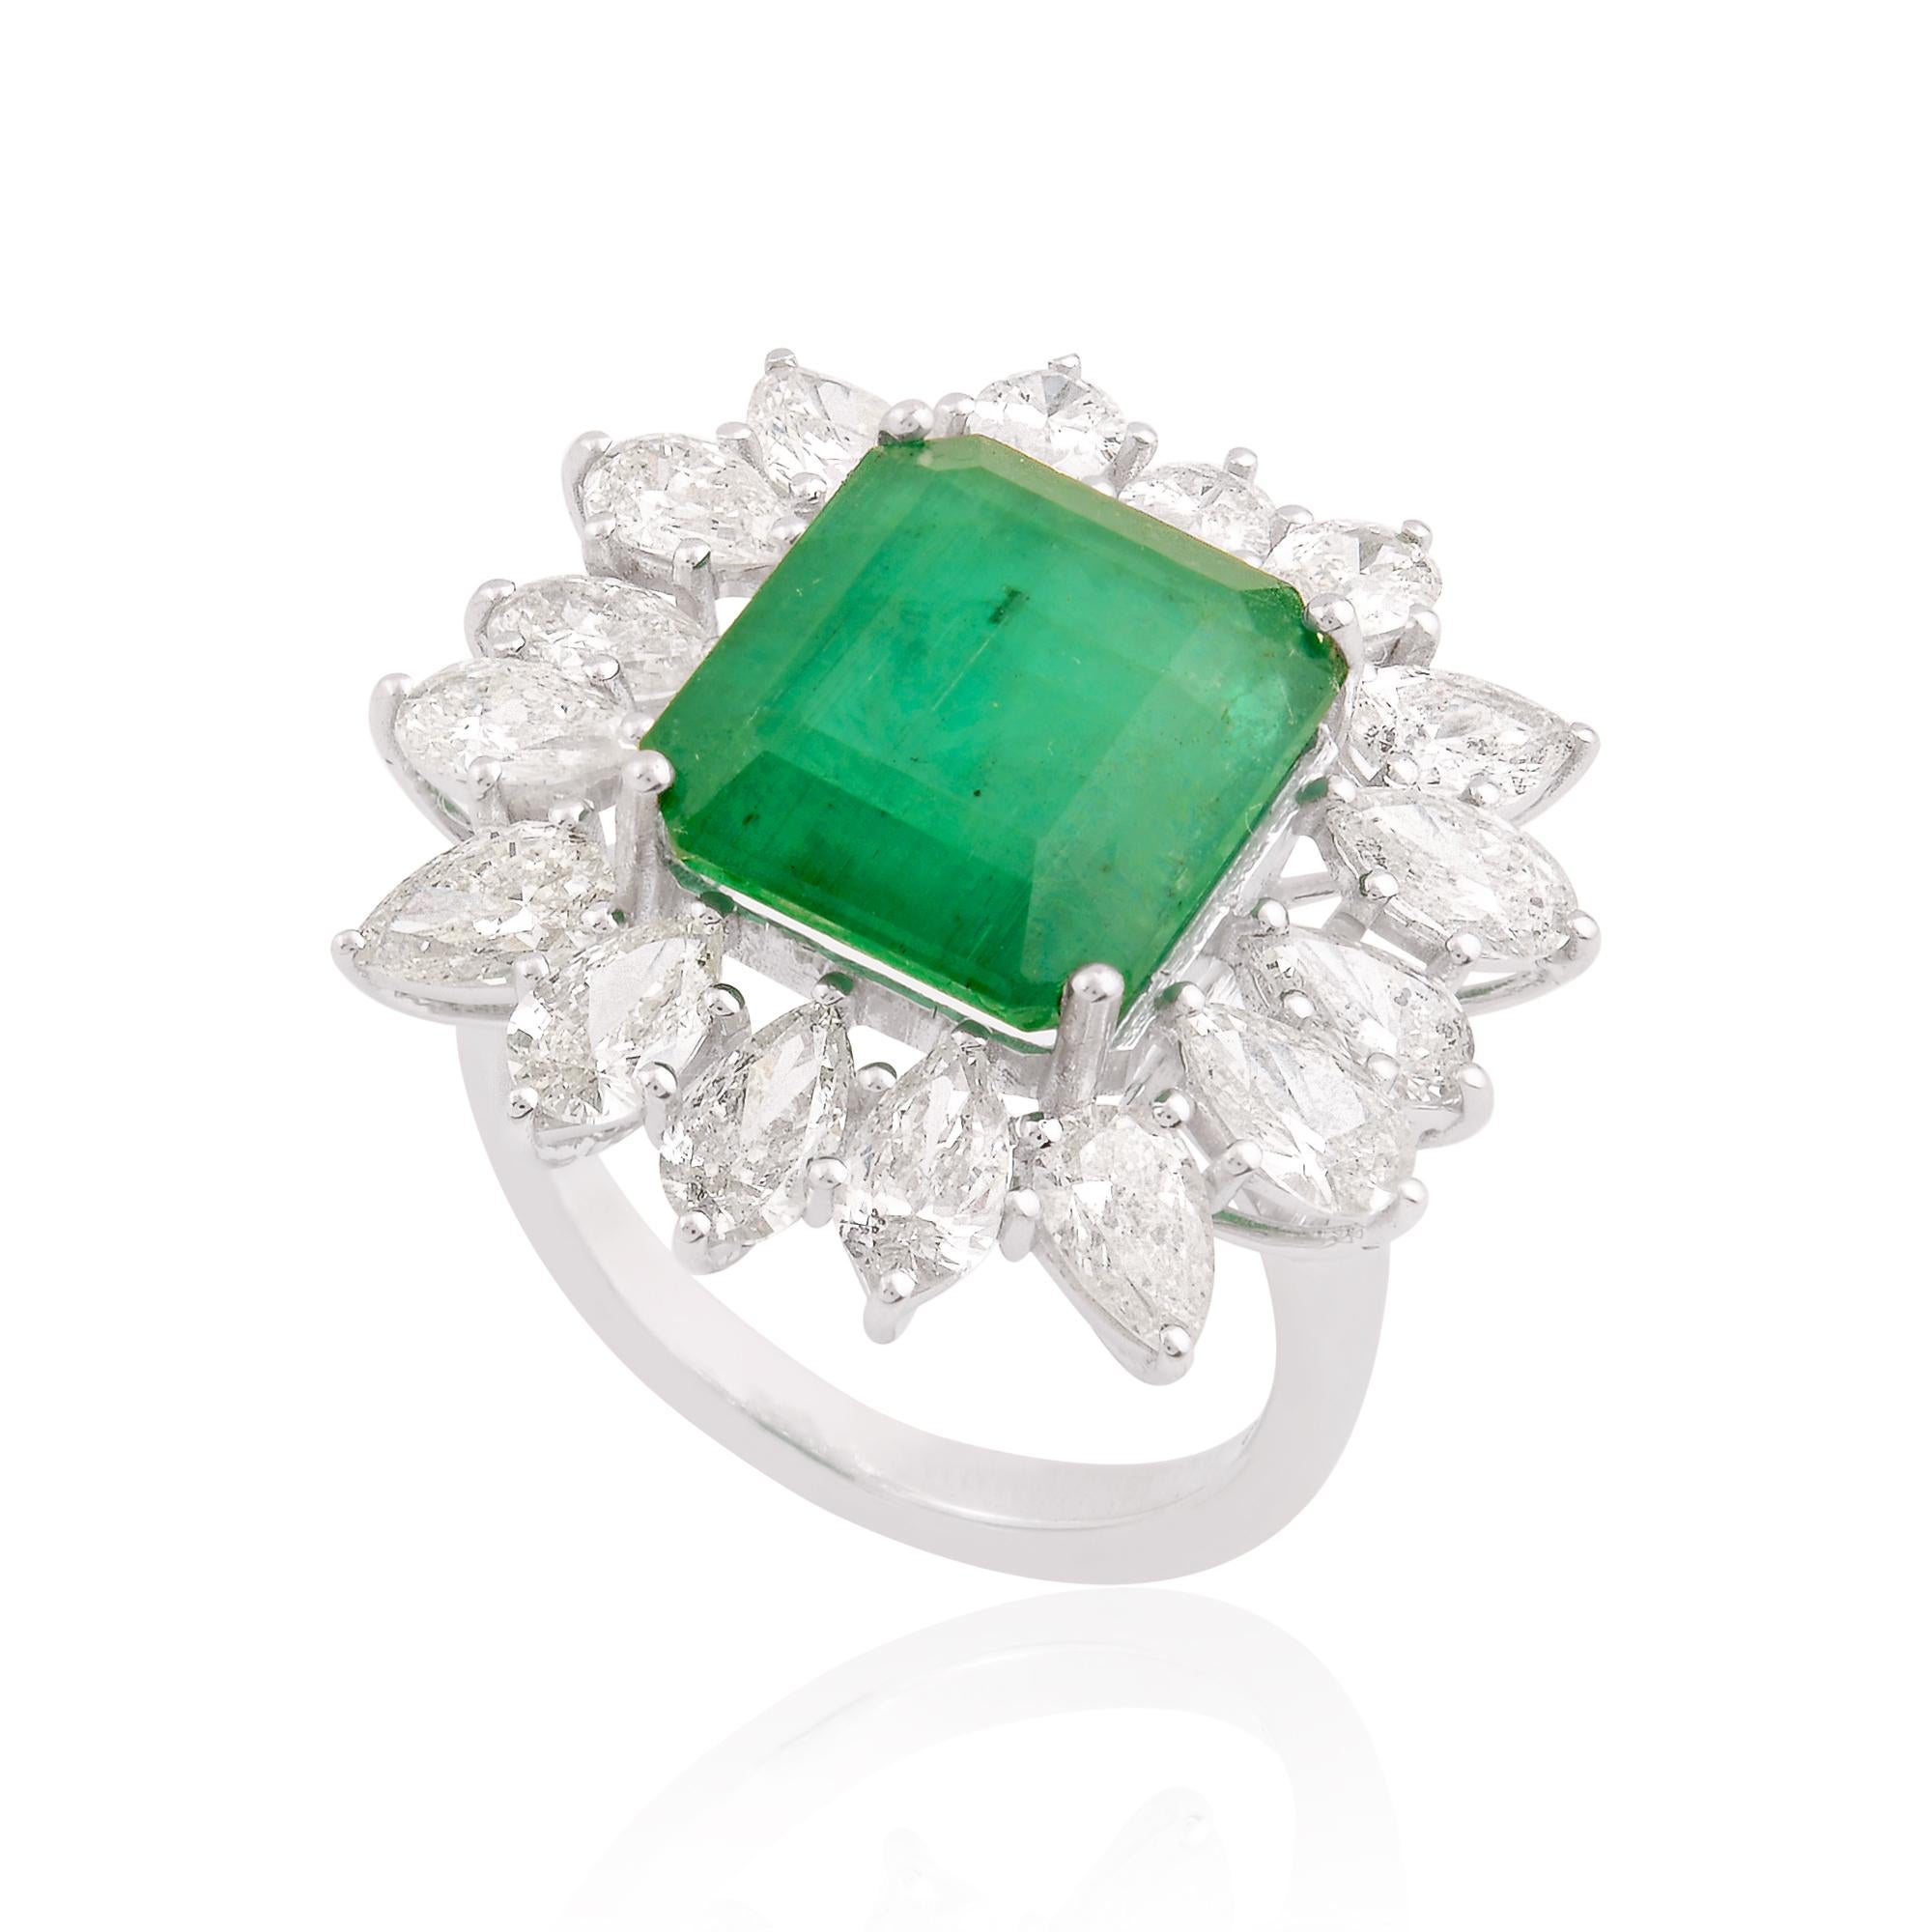 For Sale:  Zambian Emerald Cocktail Ring Pear Diamond Solid 18k White Gold Fine Jewelry 3